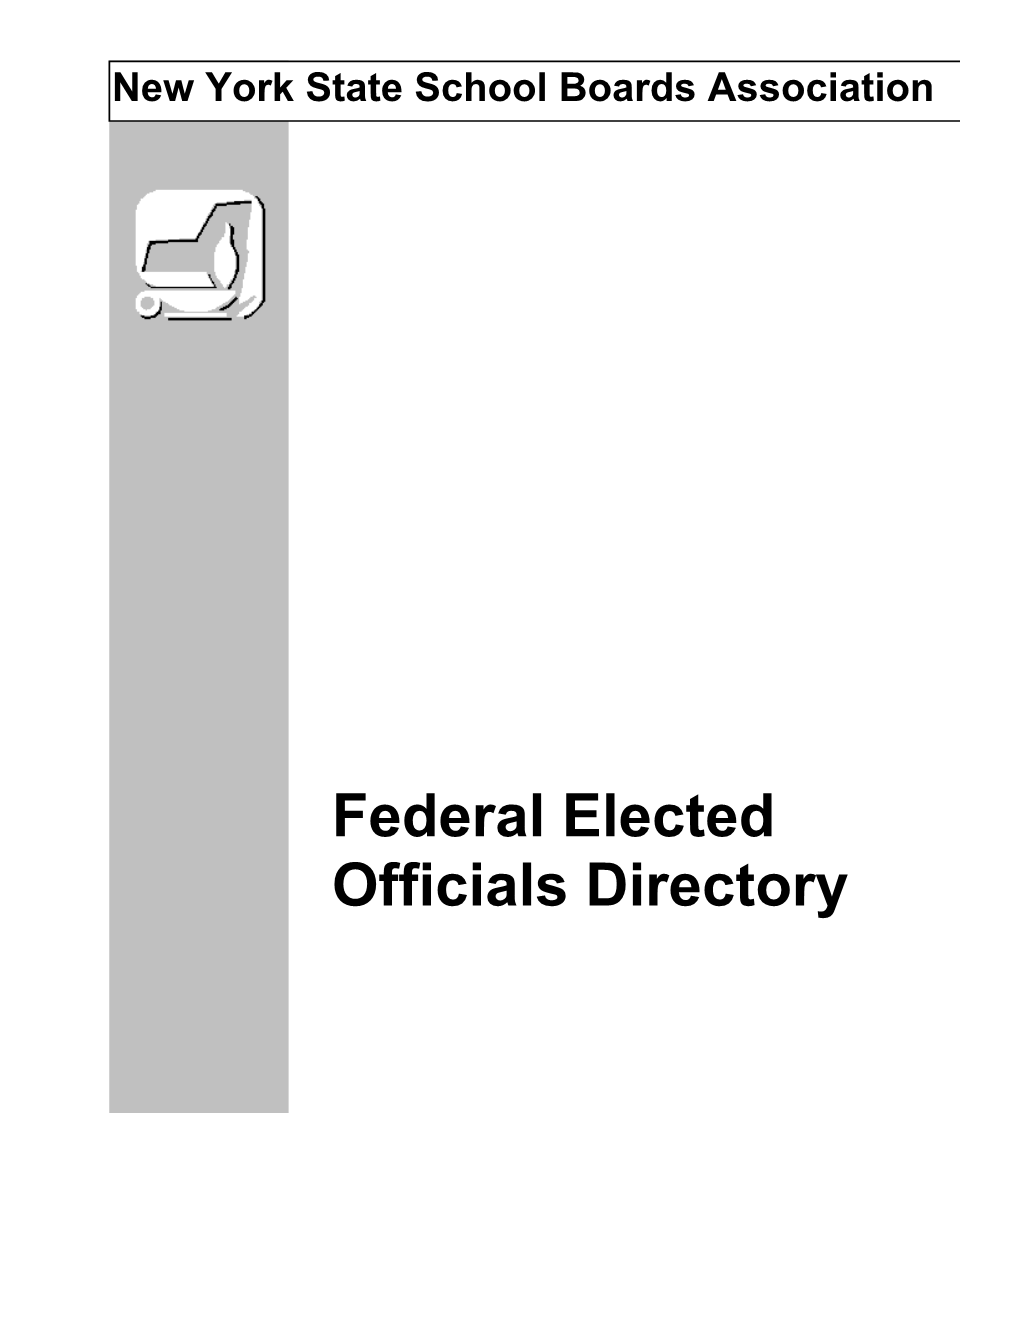 Federal Elected Officials Directory New York State School Boards Association Federal Elected Officials Directory